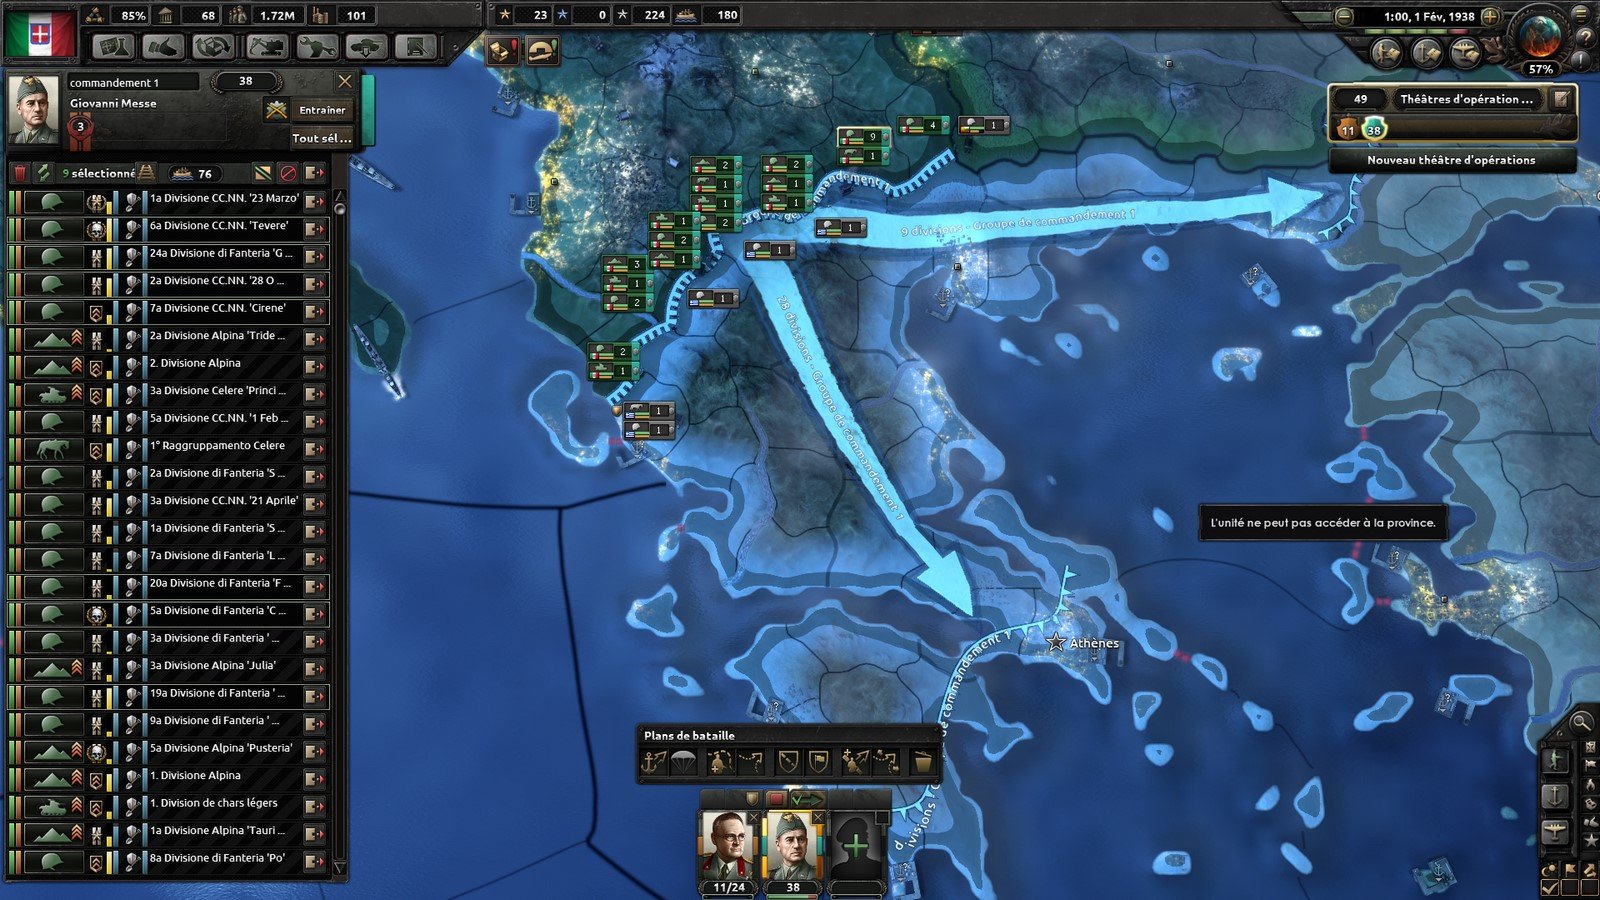 hearts of iron 5 popularity effects scaled